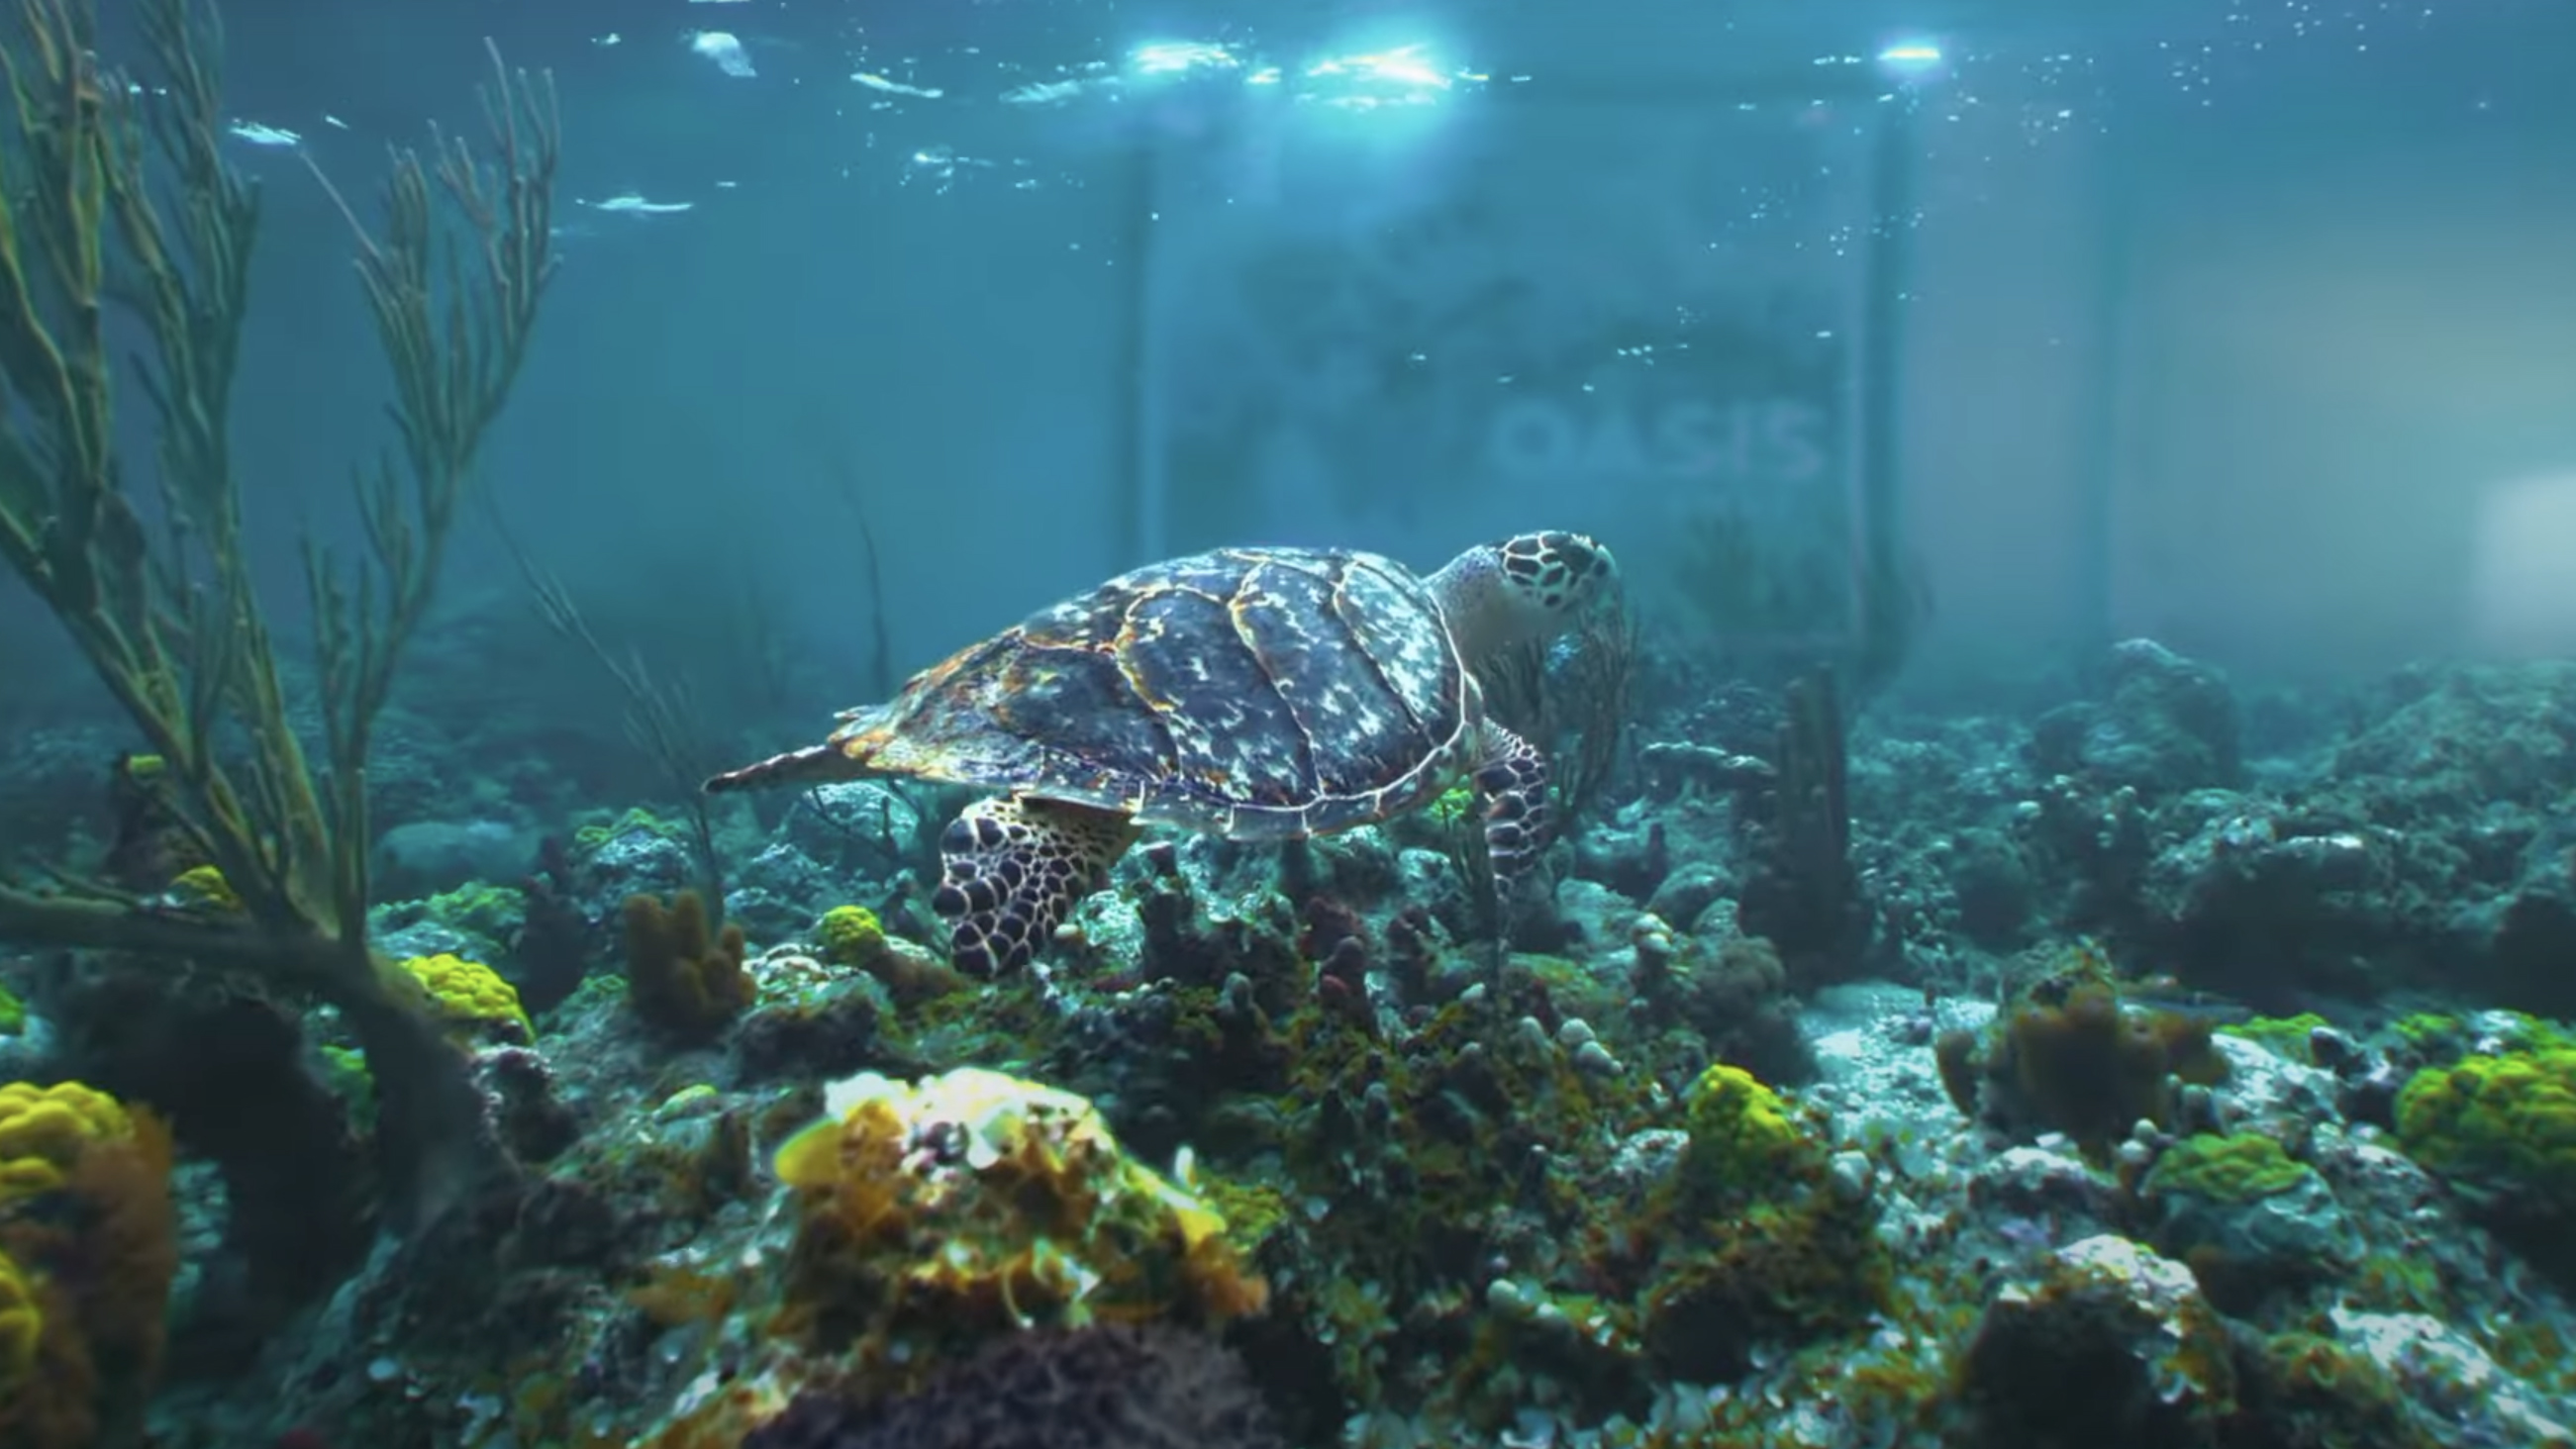 A turtle swimming in virtual water in a living room